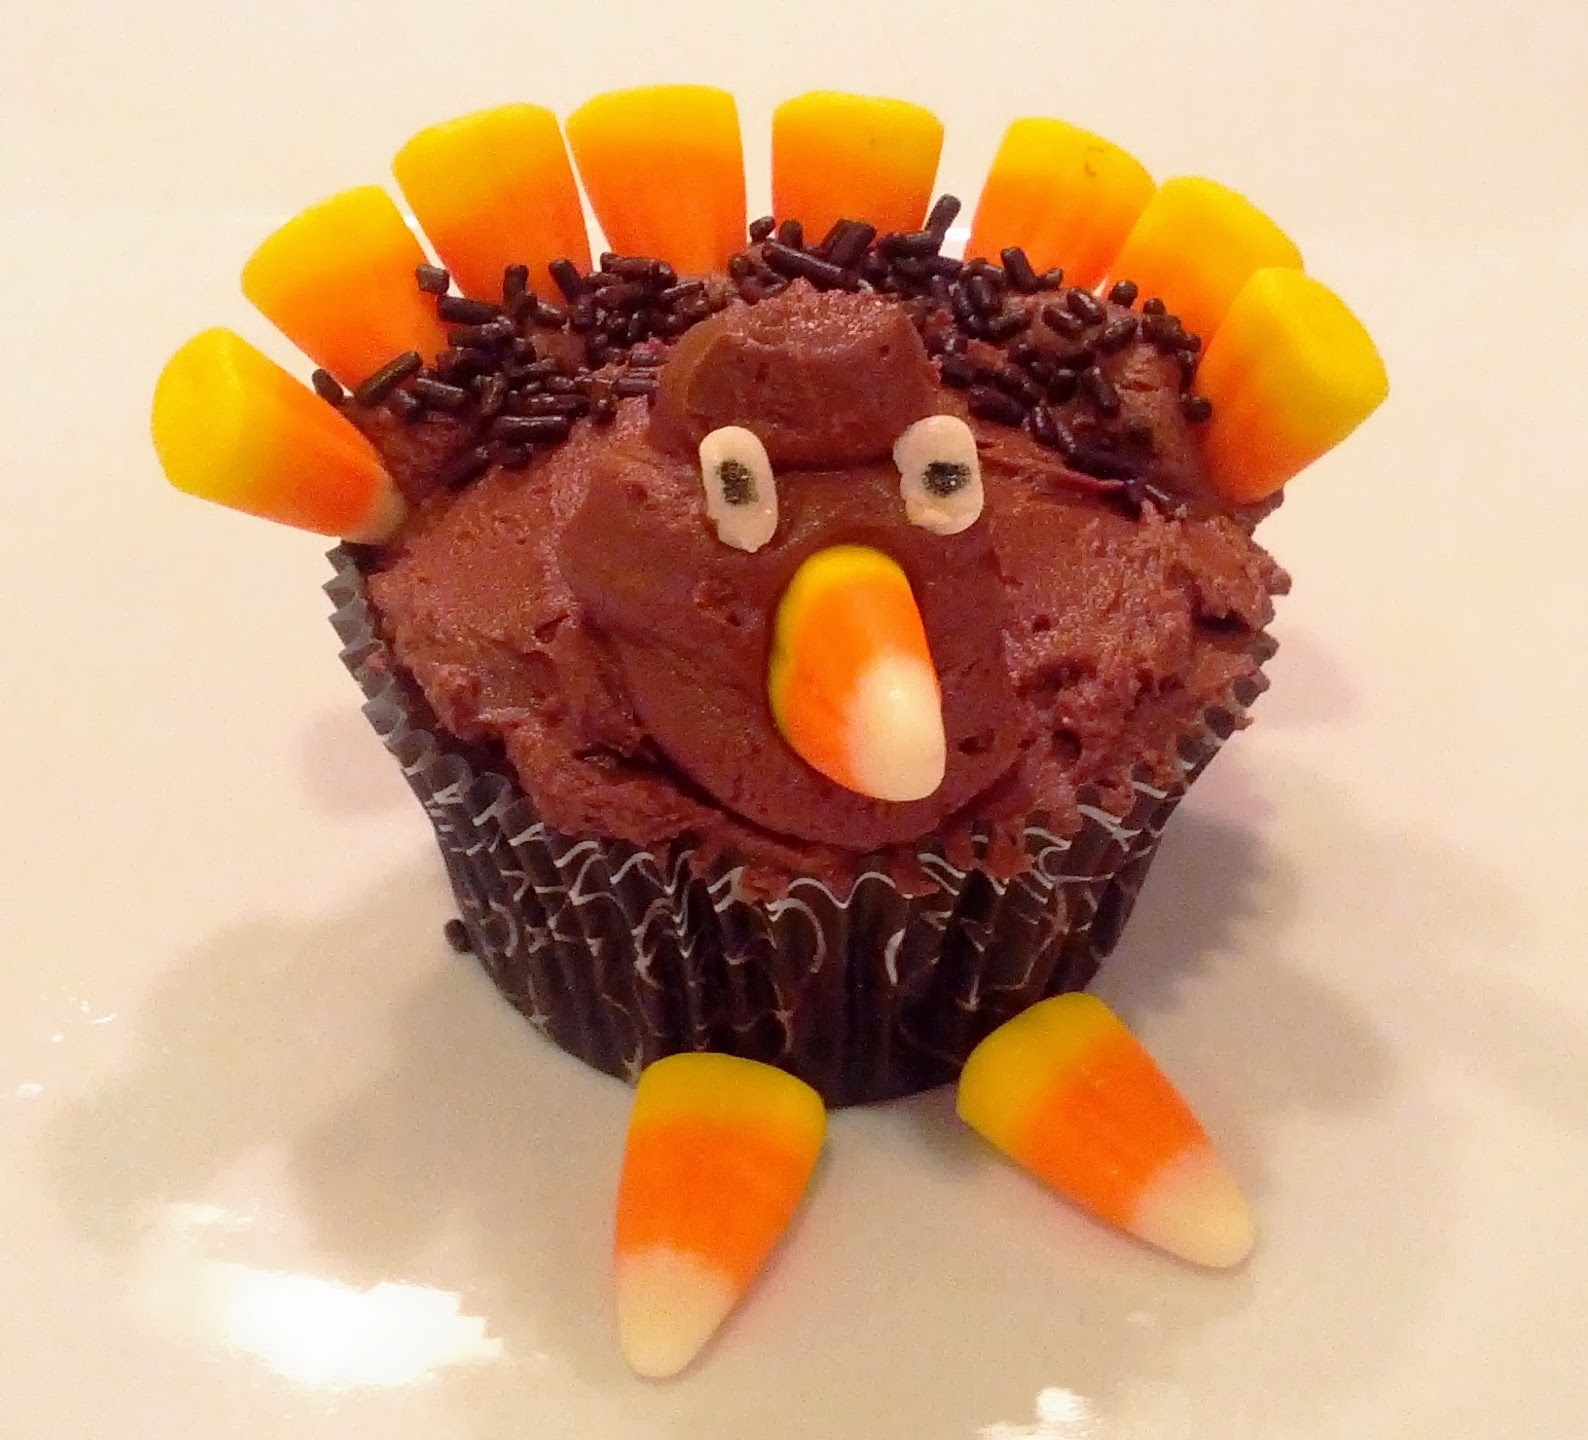 Yipson Foods Recipes and Blog: Easy to Make Turkey Cupcakes